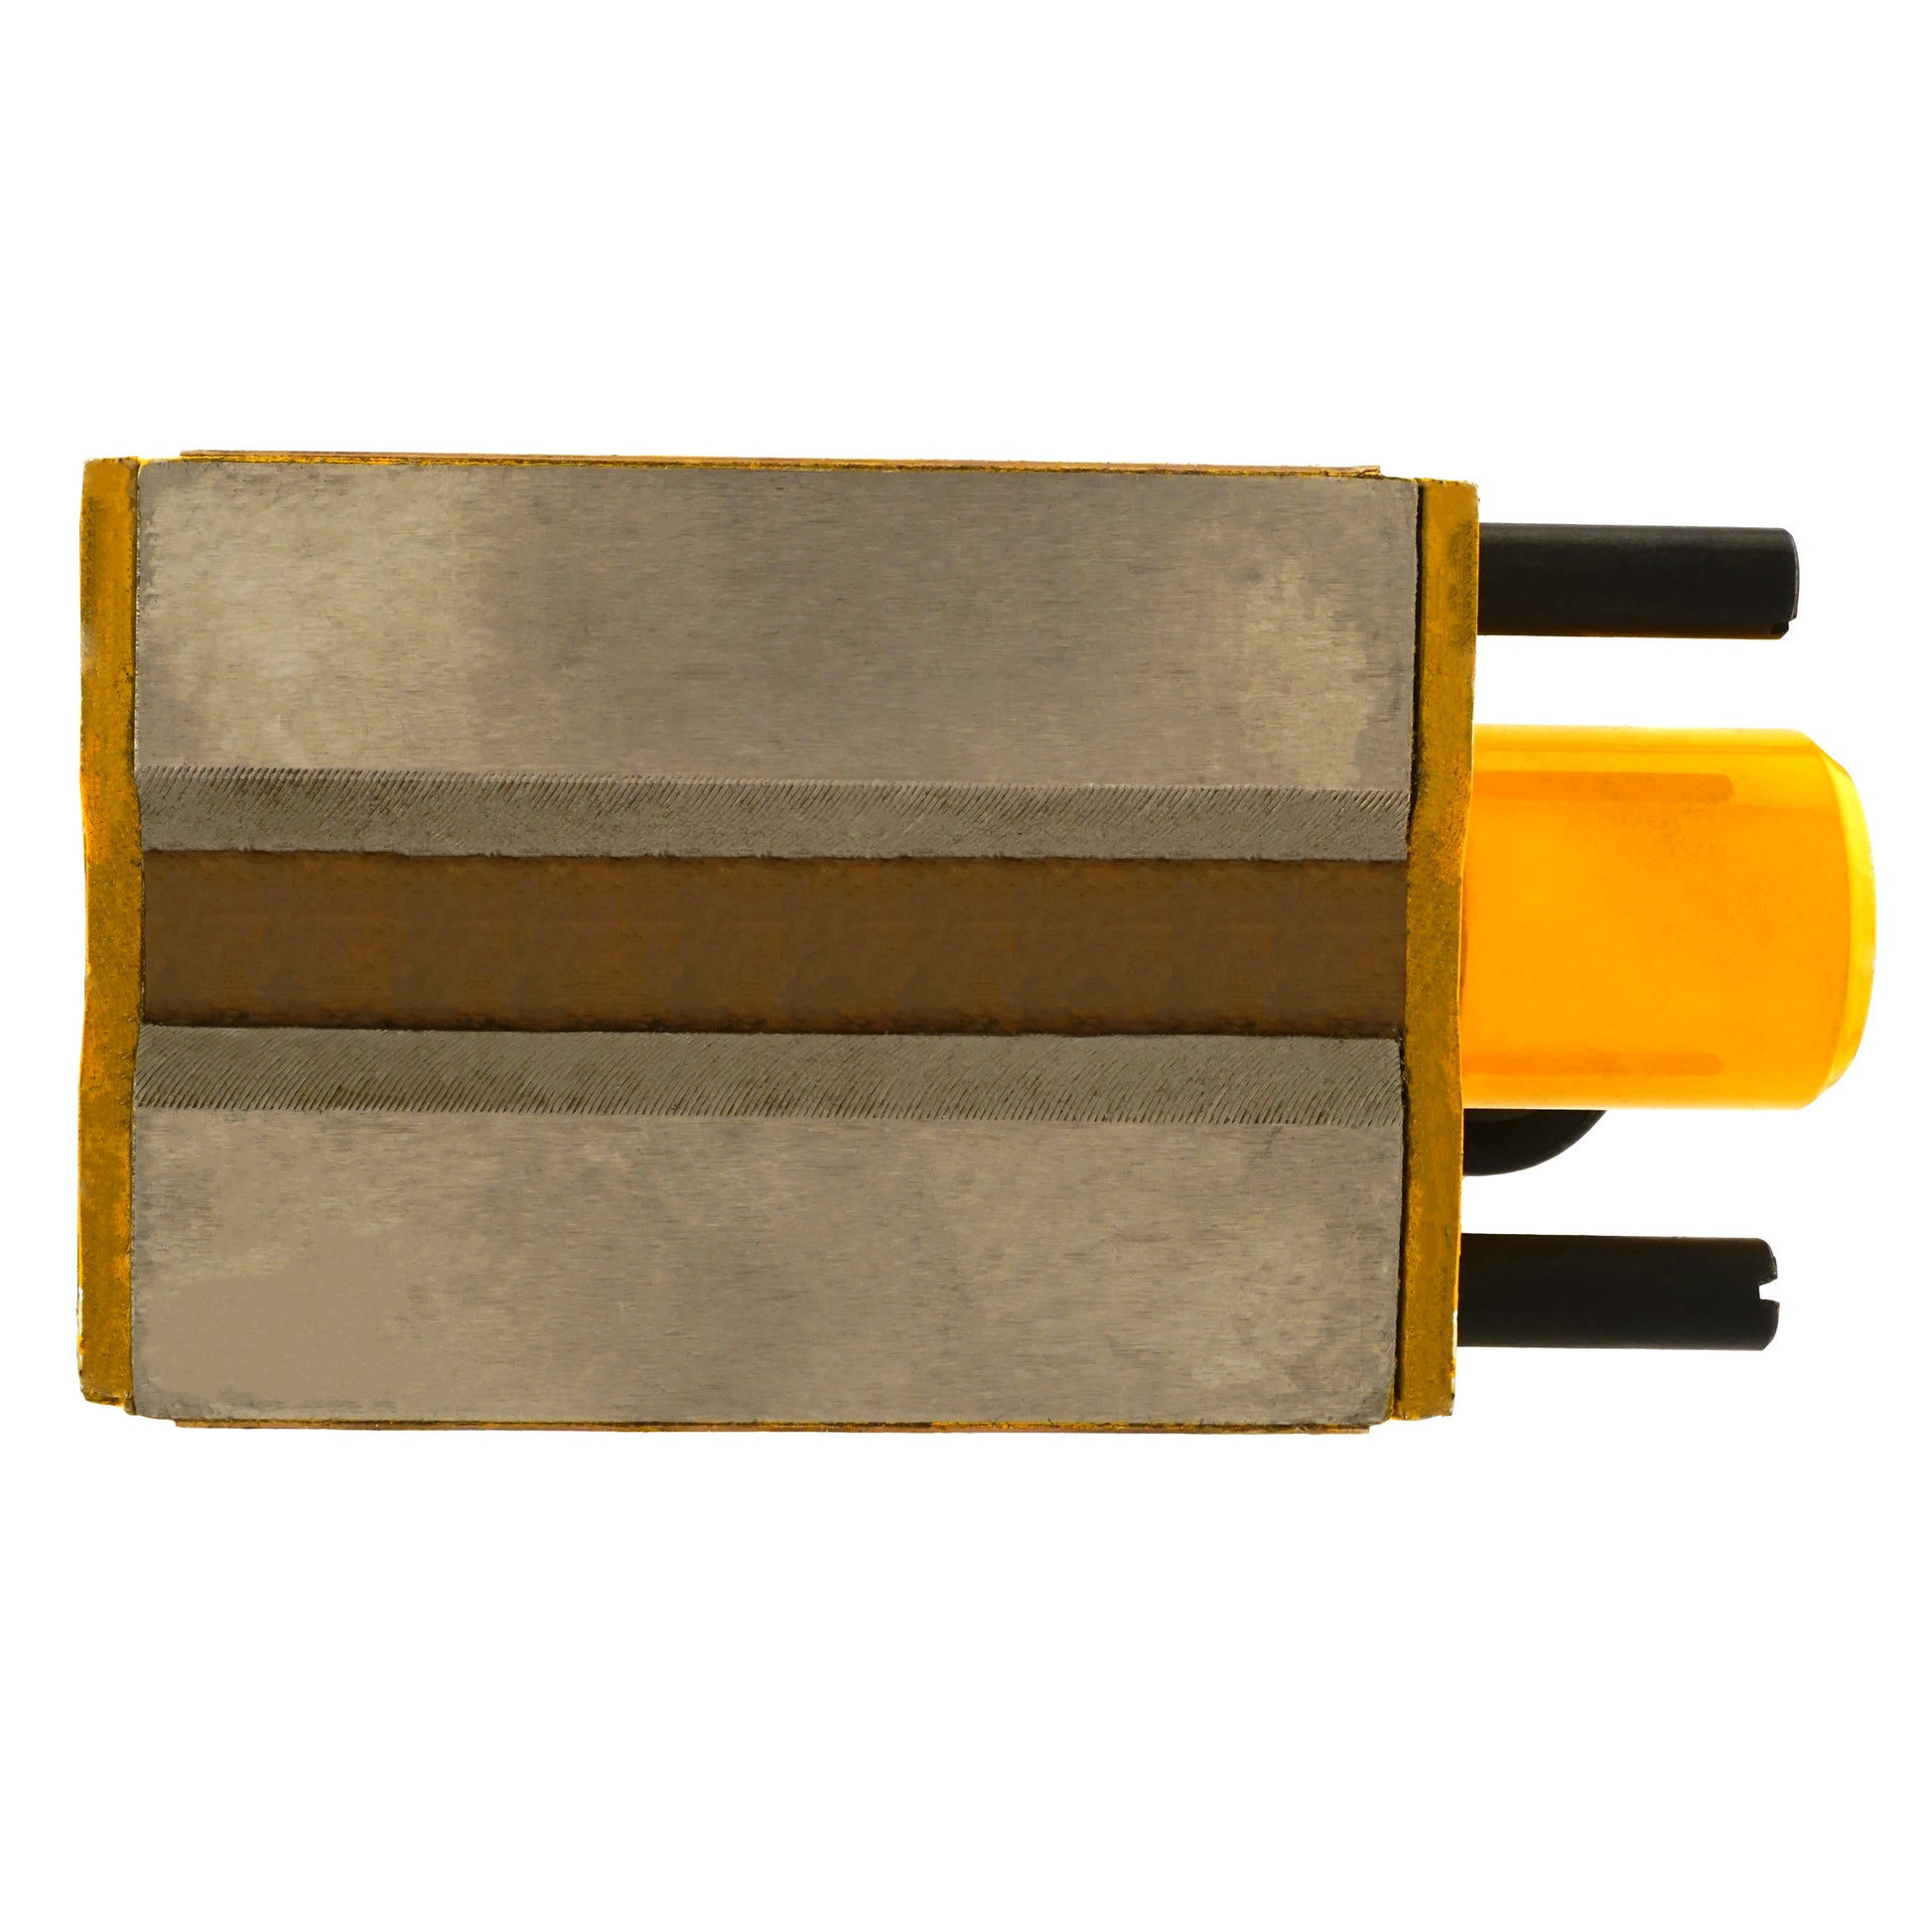 Load image into Gallery viewer, HDNLM220 Heavy-Duty Neodymium Lifting Magnet - Back View